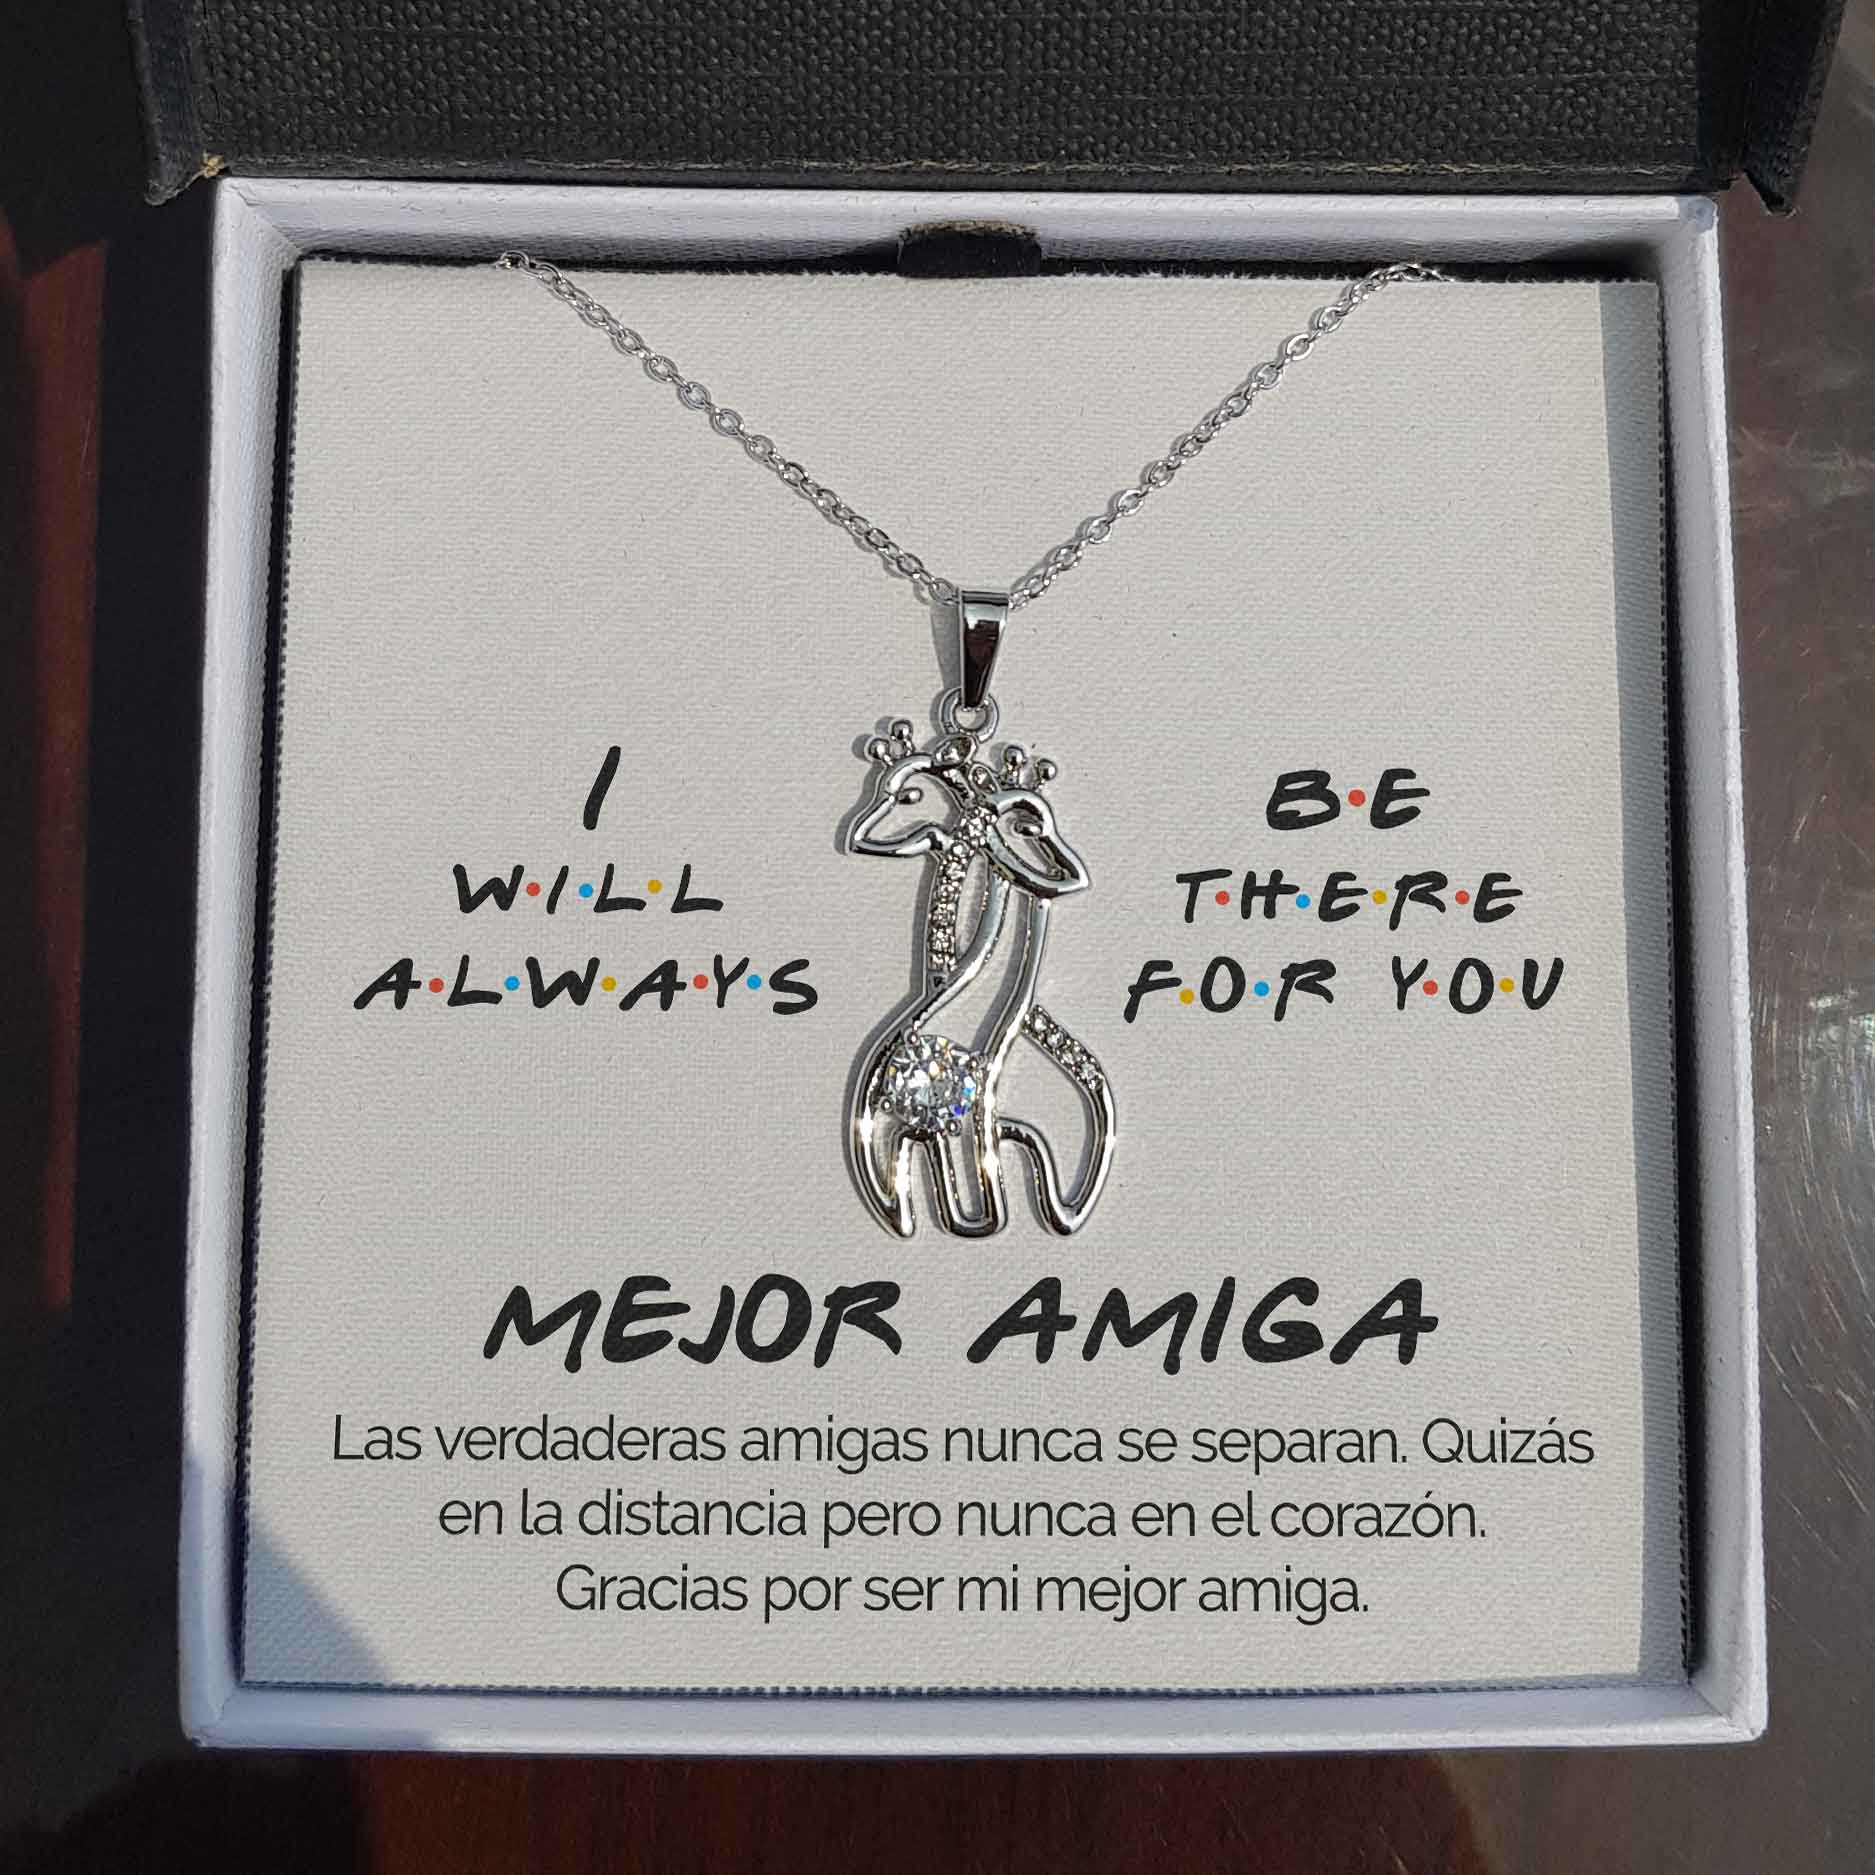 ShineOn Fulfillment Message Cards 14K White Gold Finish Mejor Amiga - I Will Always Be There For You - Collar de Jirafa